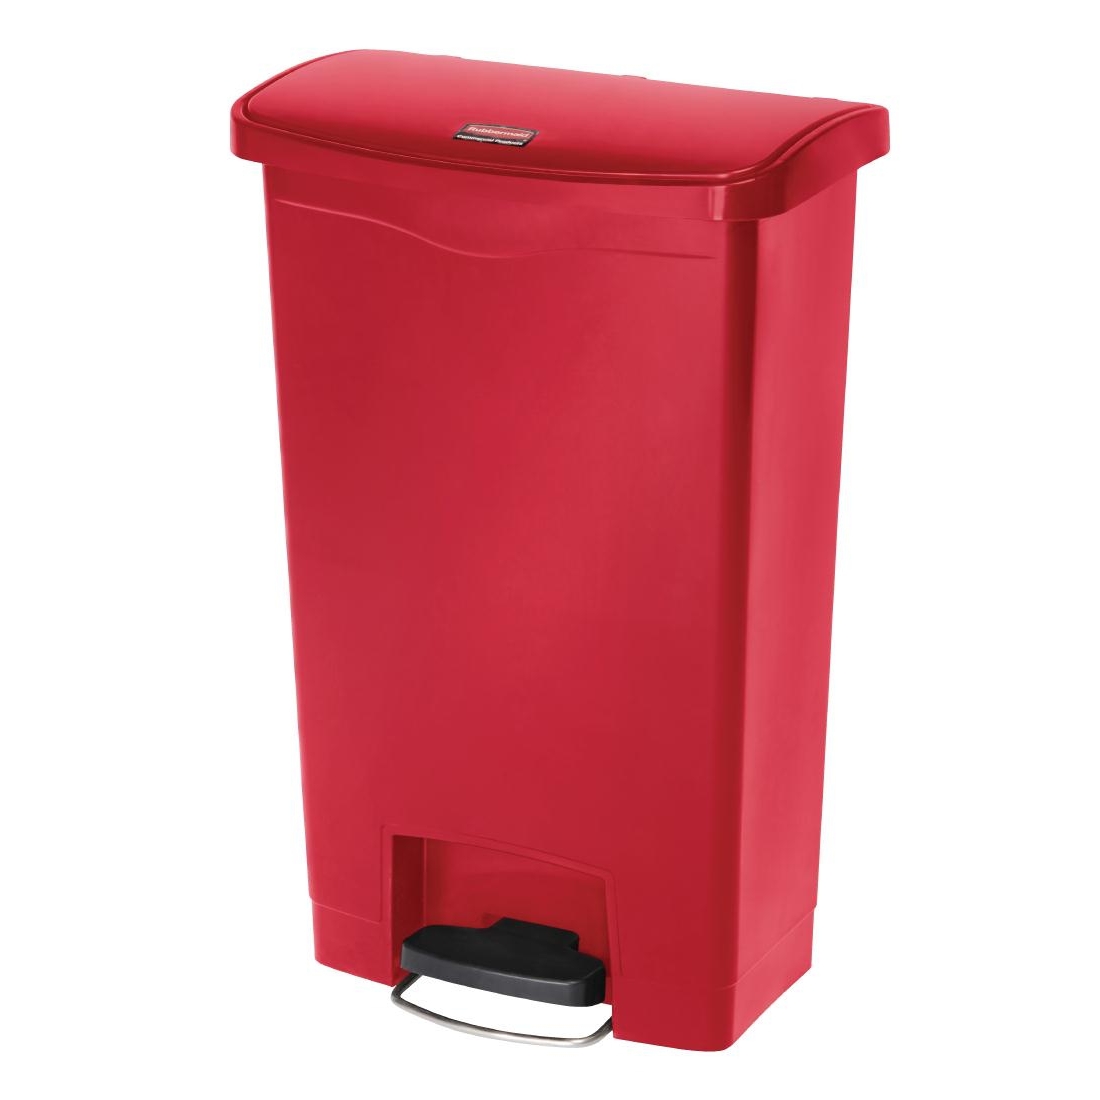 Rubbermaid Slim Jim Step on Front Pedal Red 50Ltr